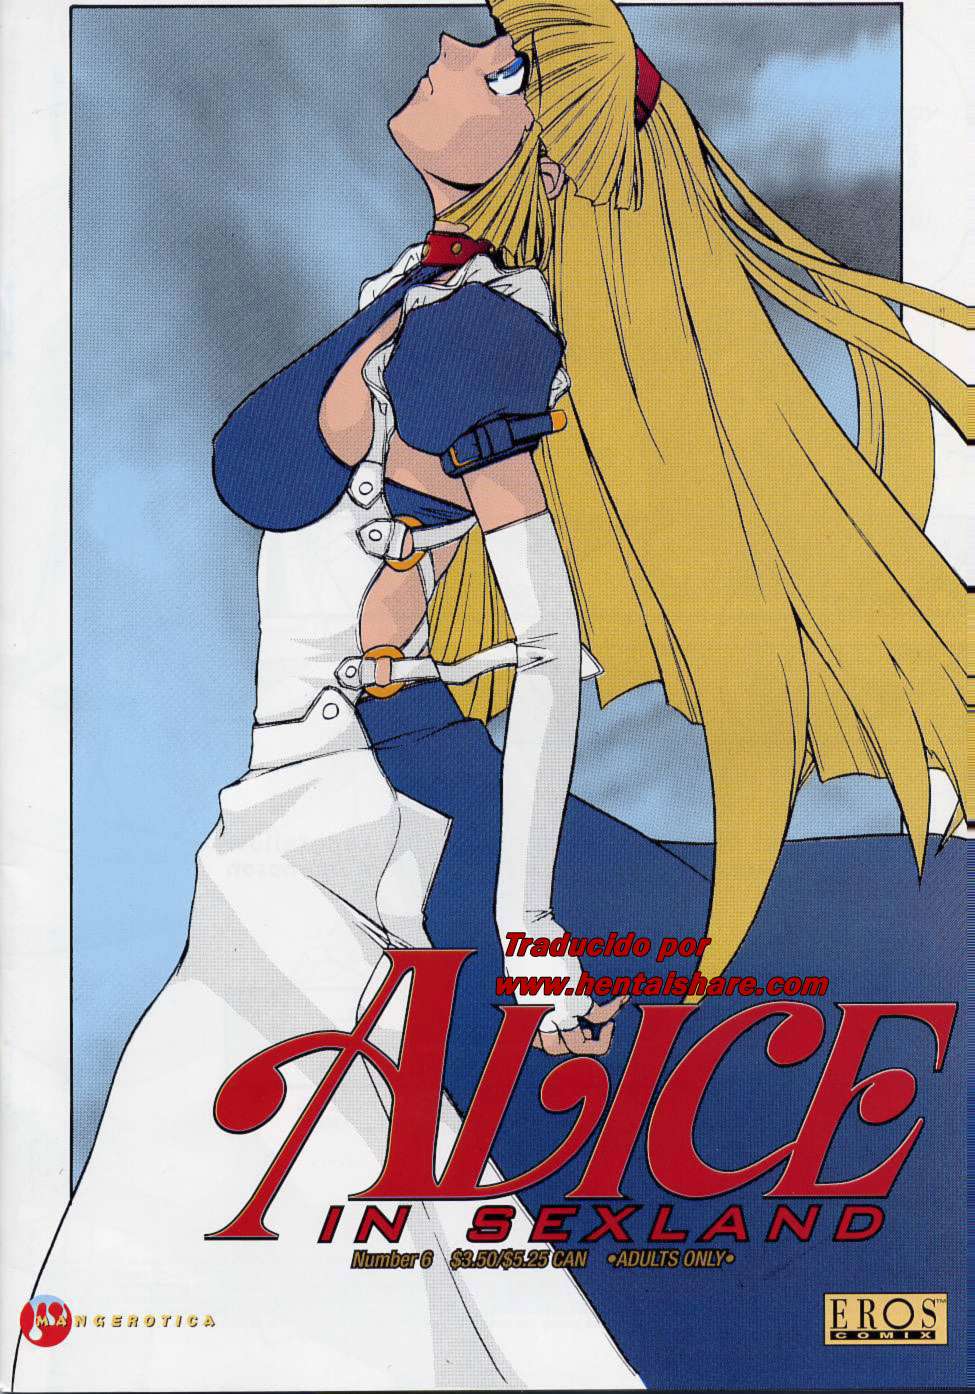 Alice In Sexland Chapter-6 - 0